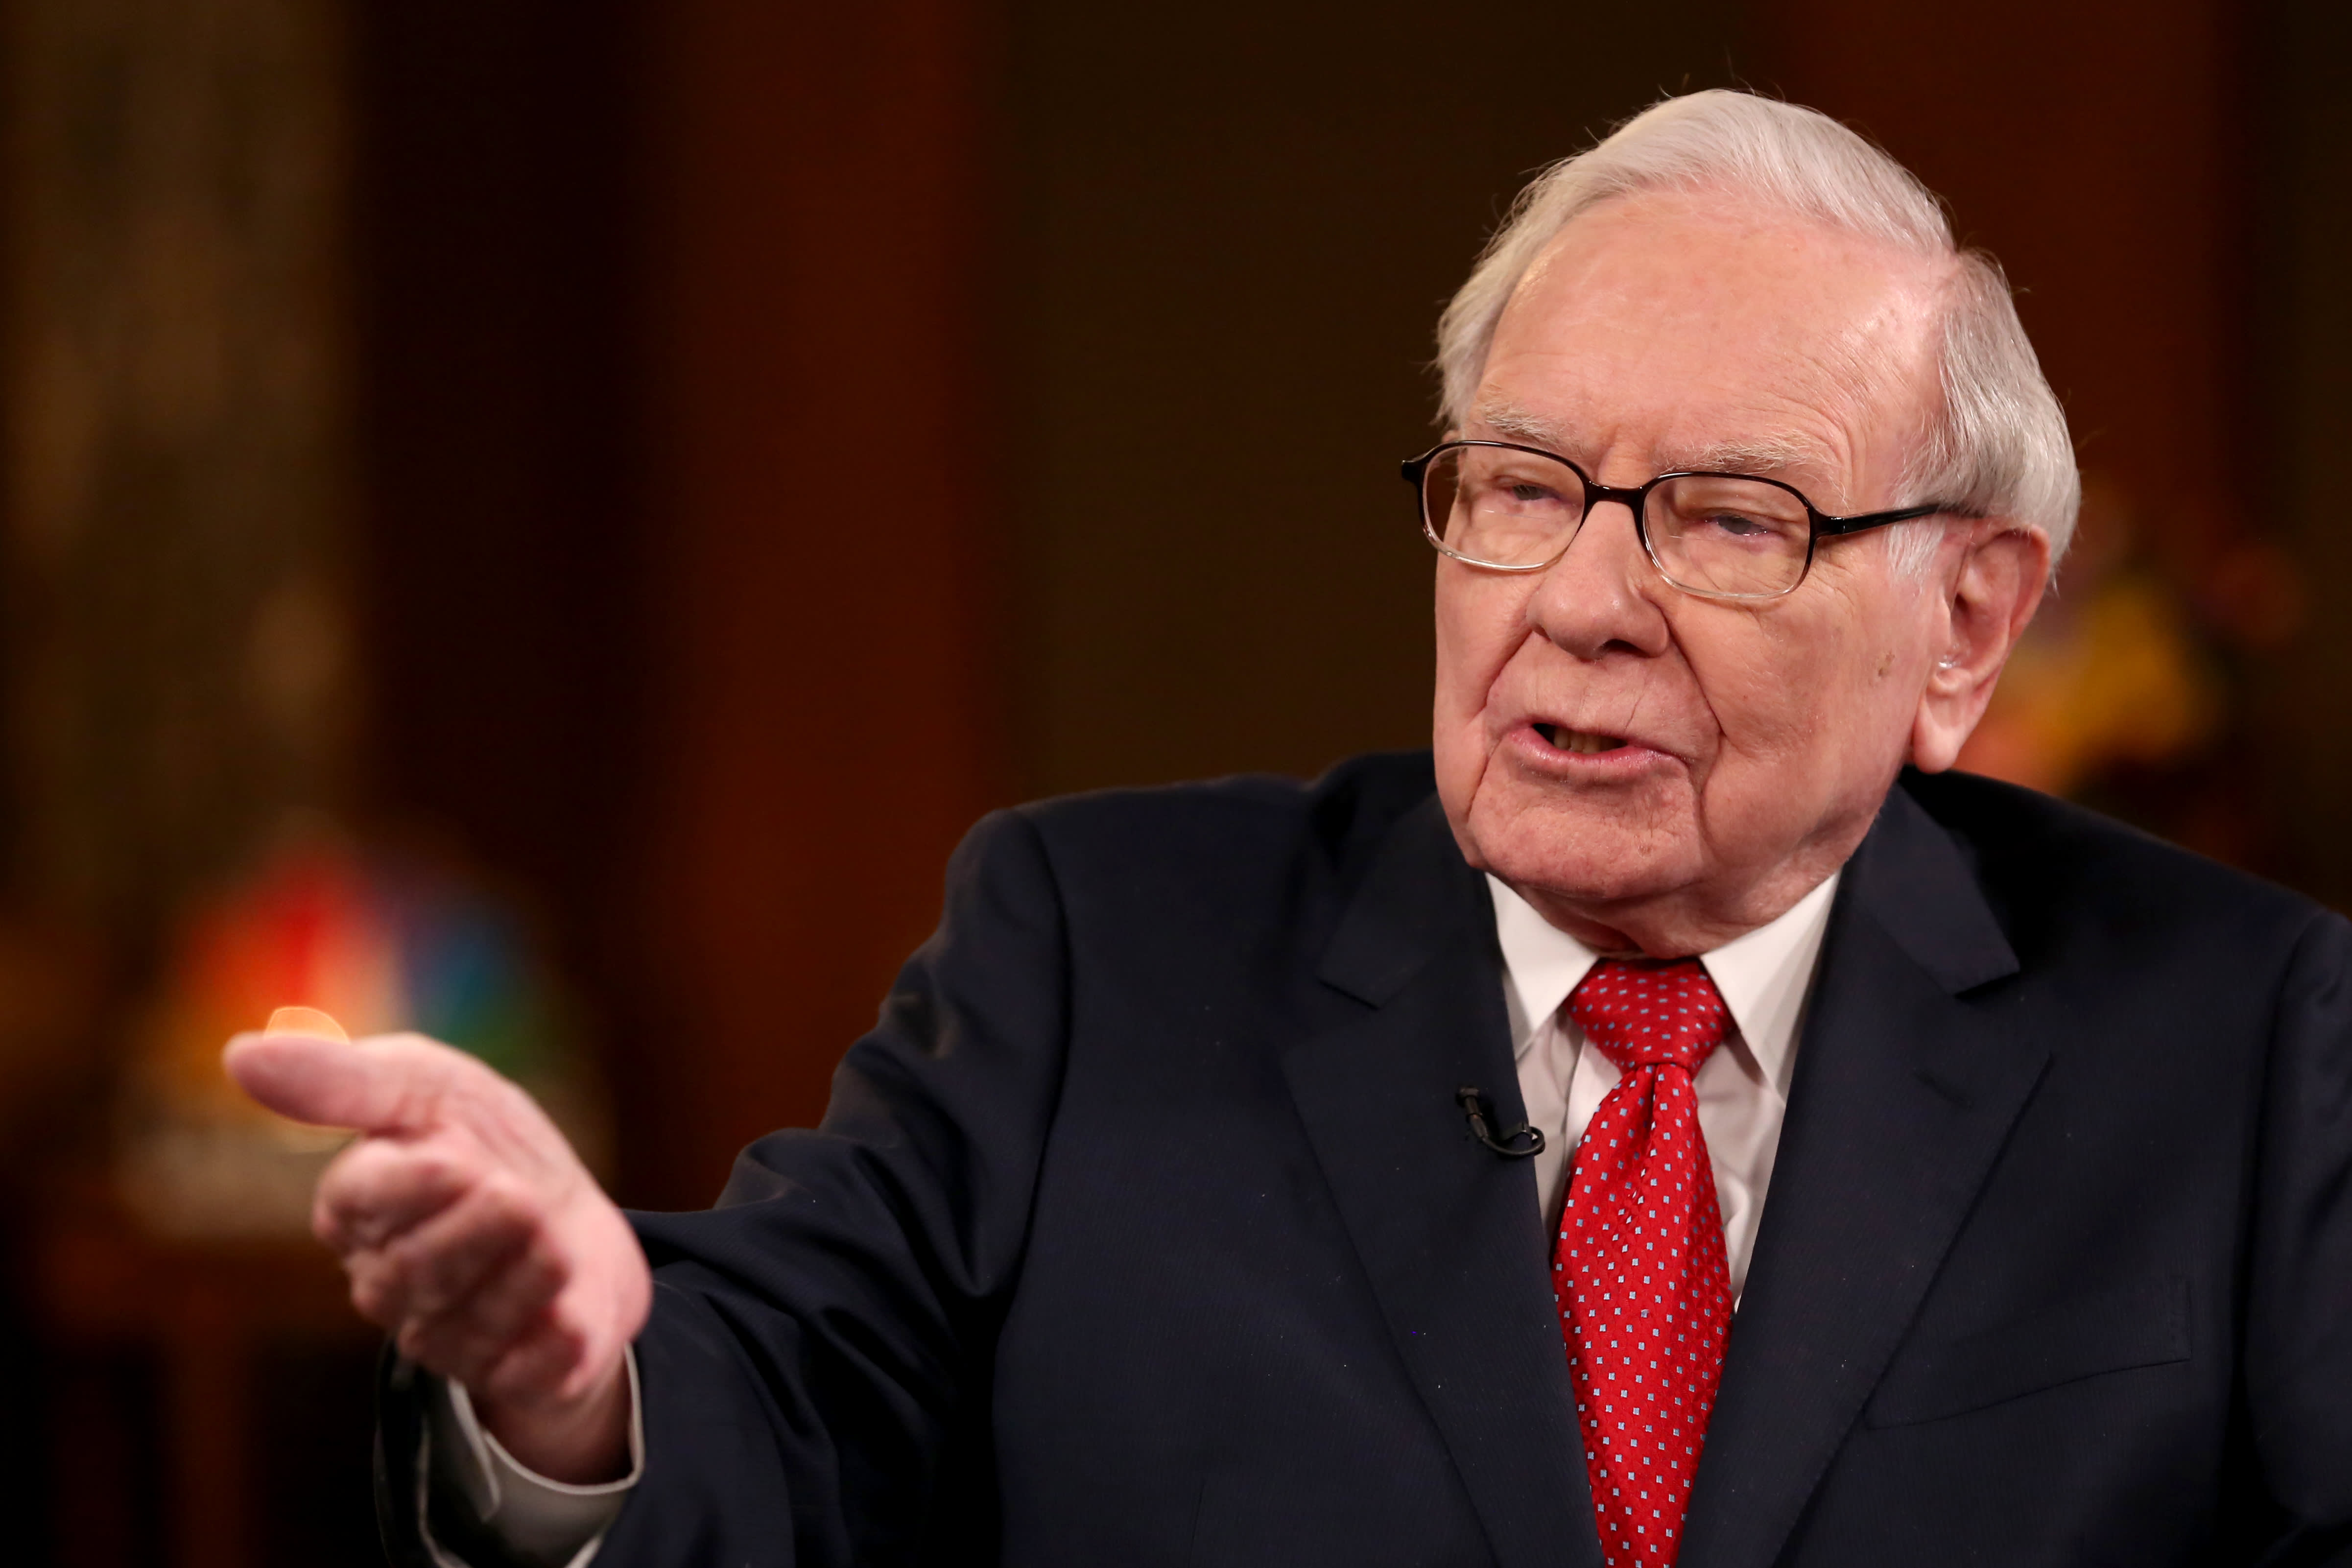 Buffett is buying back more Berkshire shares this year after a record $ 25 billion buyback in 2020